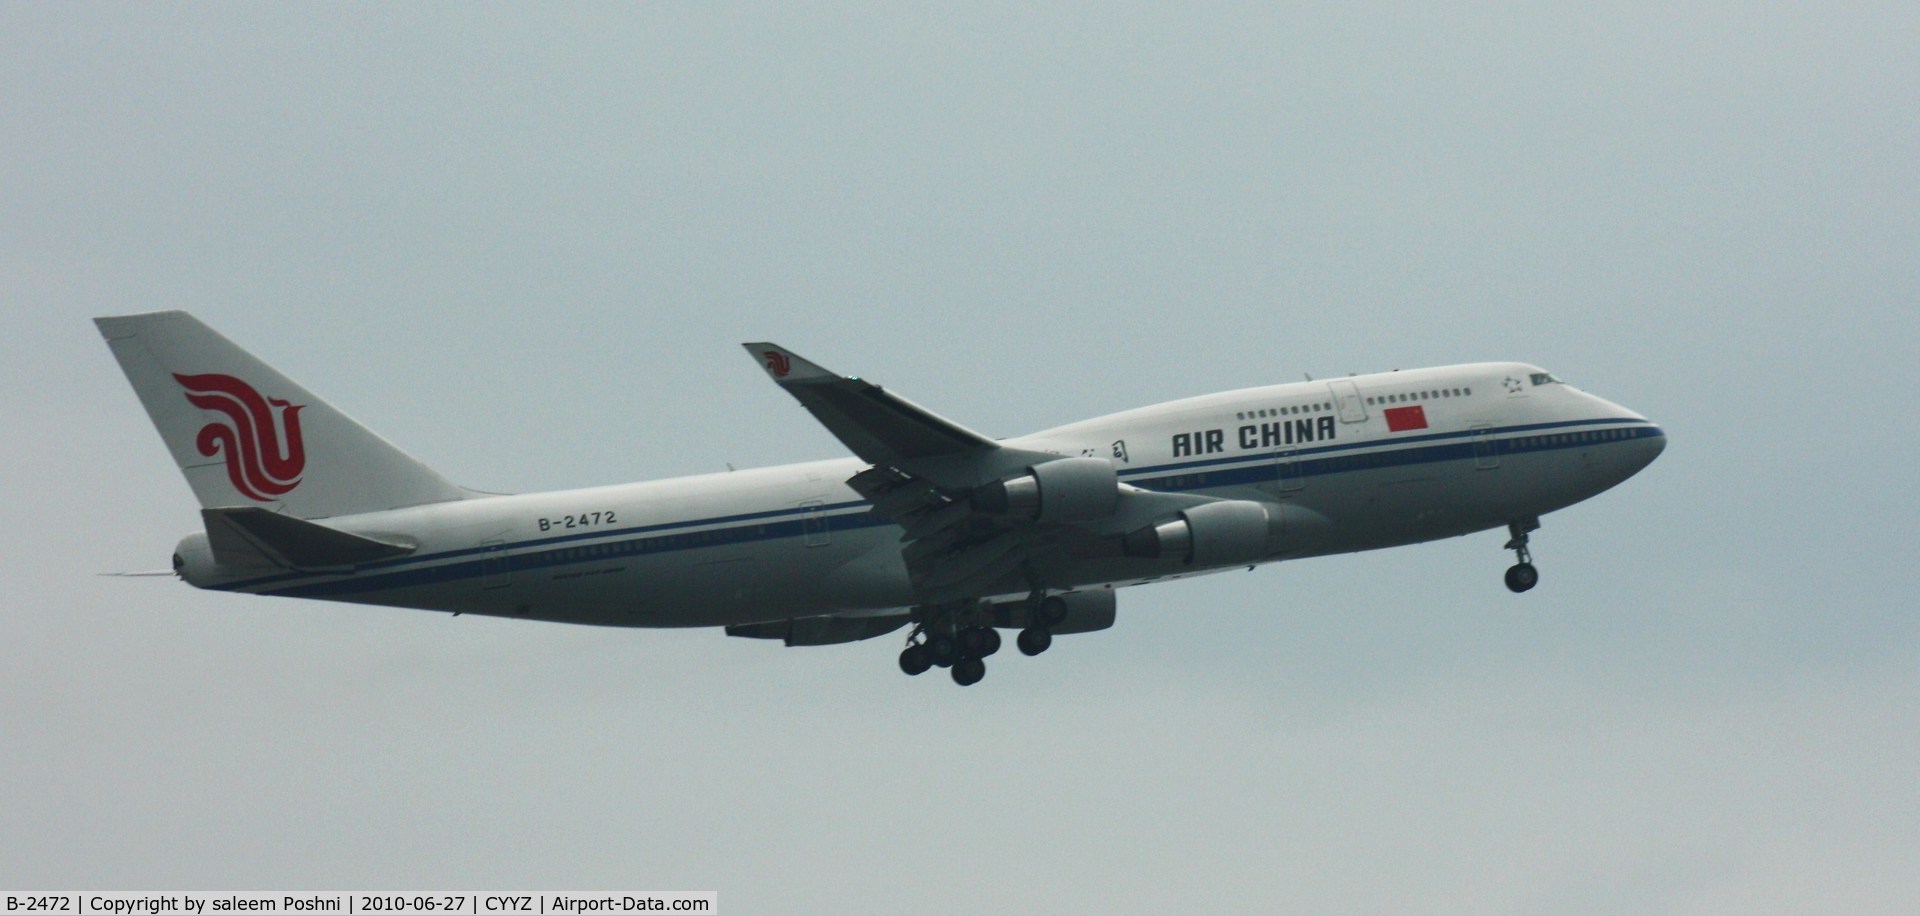 B-2472, 2000 Boeing 747-4J6 C/N 30158, Air China Flight 001 departing CYYZ with Chinese president Hu Jin Tao following the G20 meeting.  Heavy rain and poor visibility on that day.